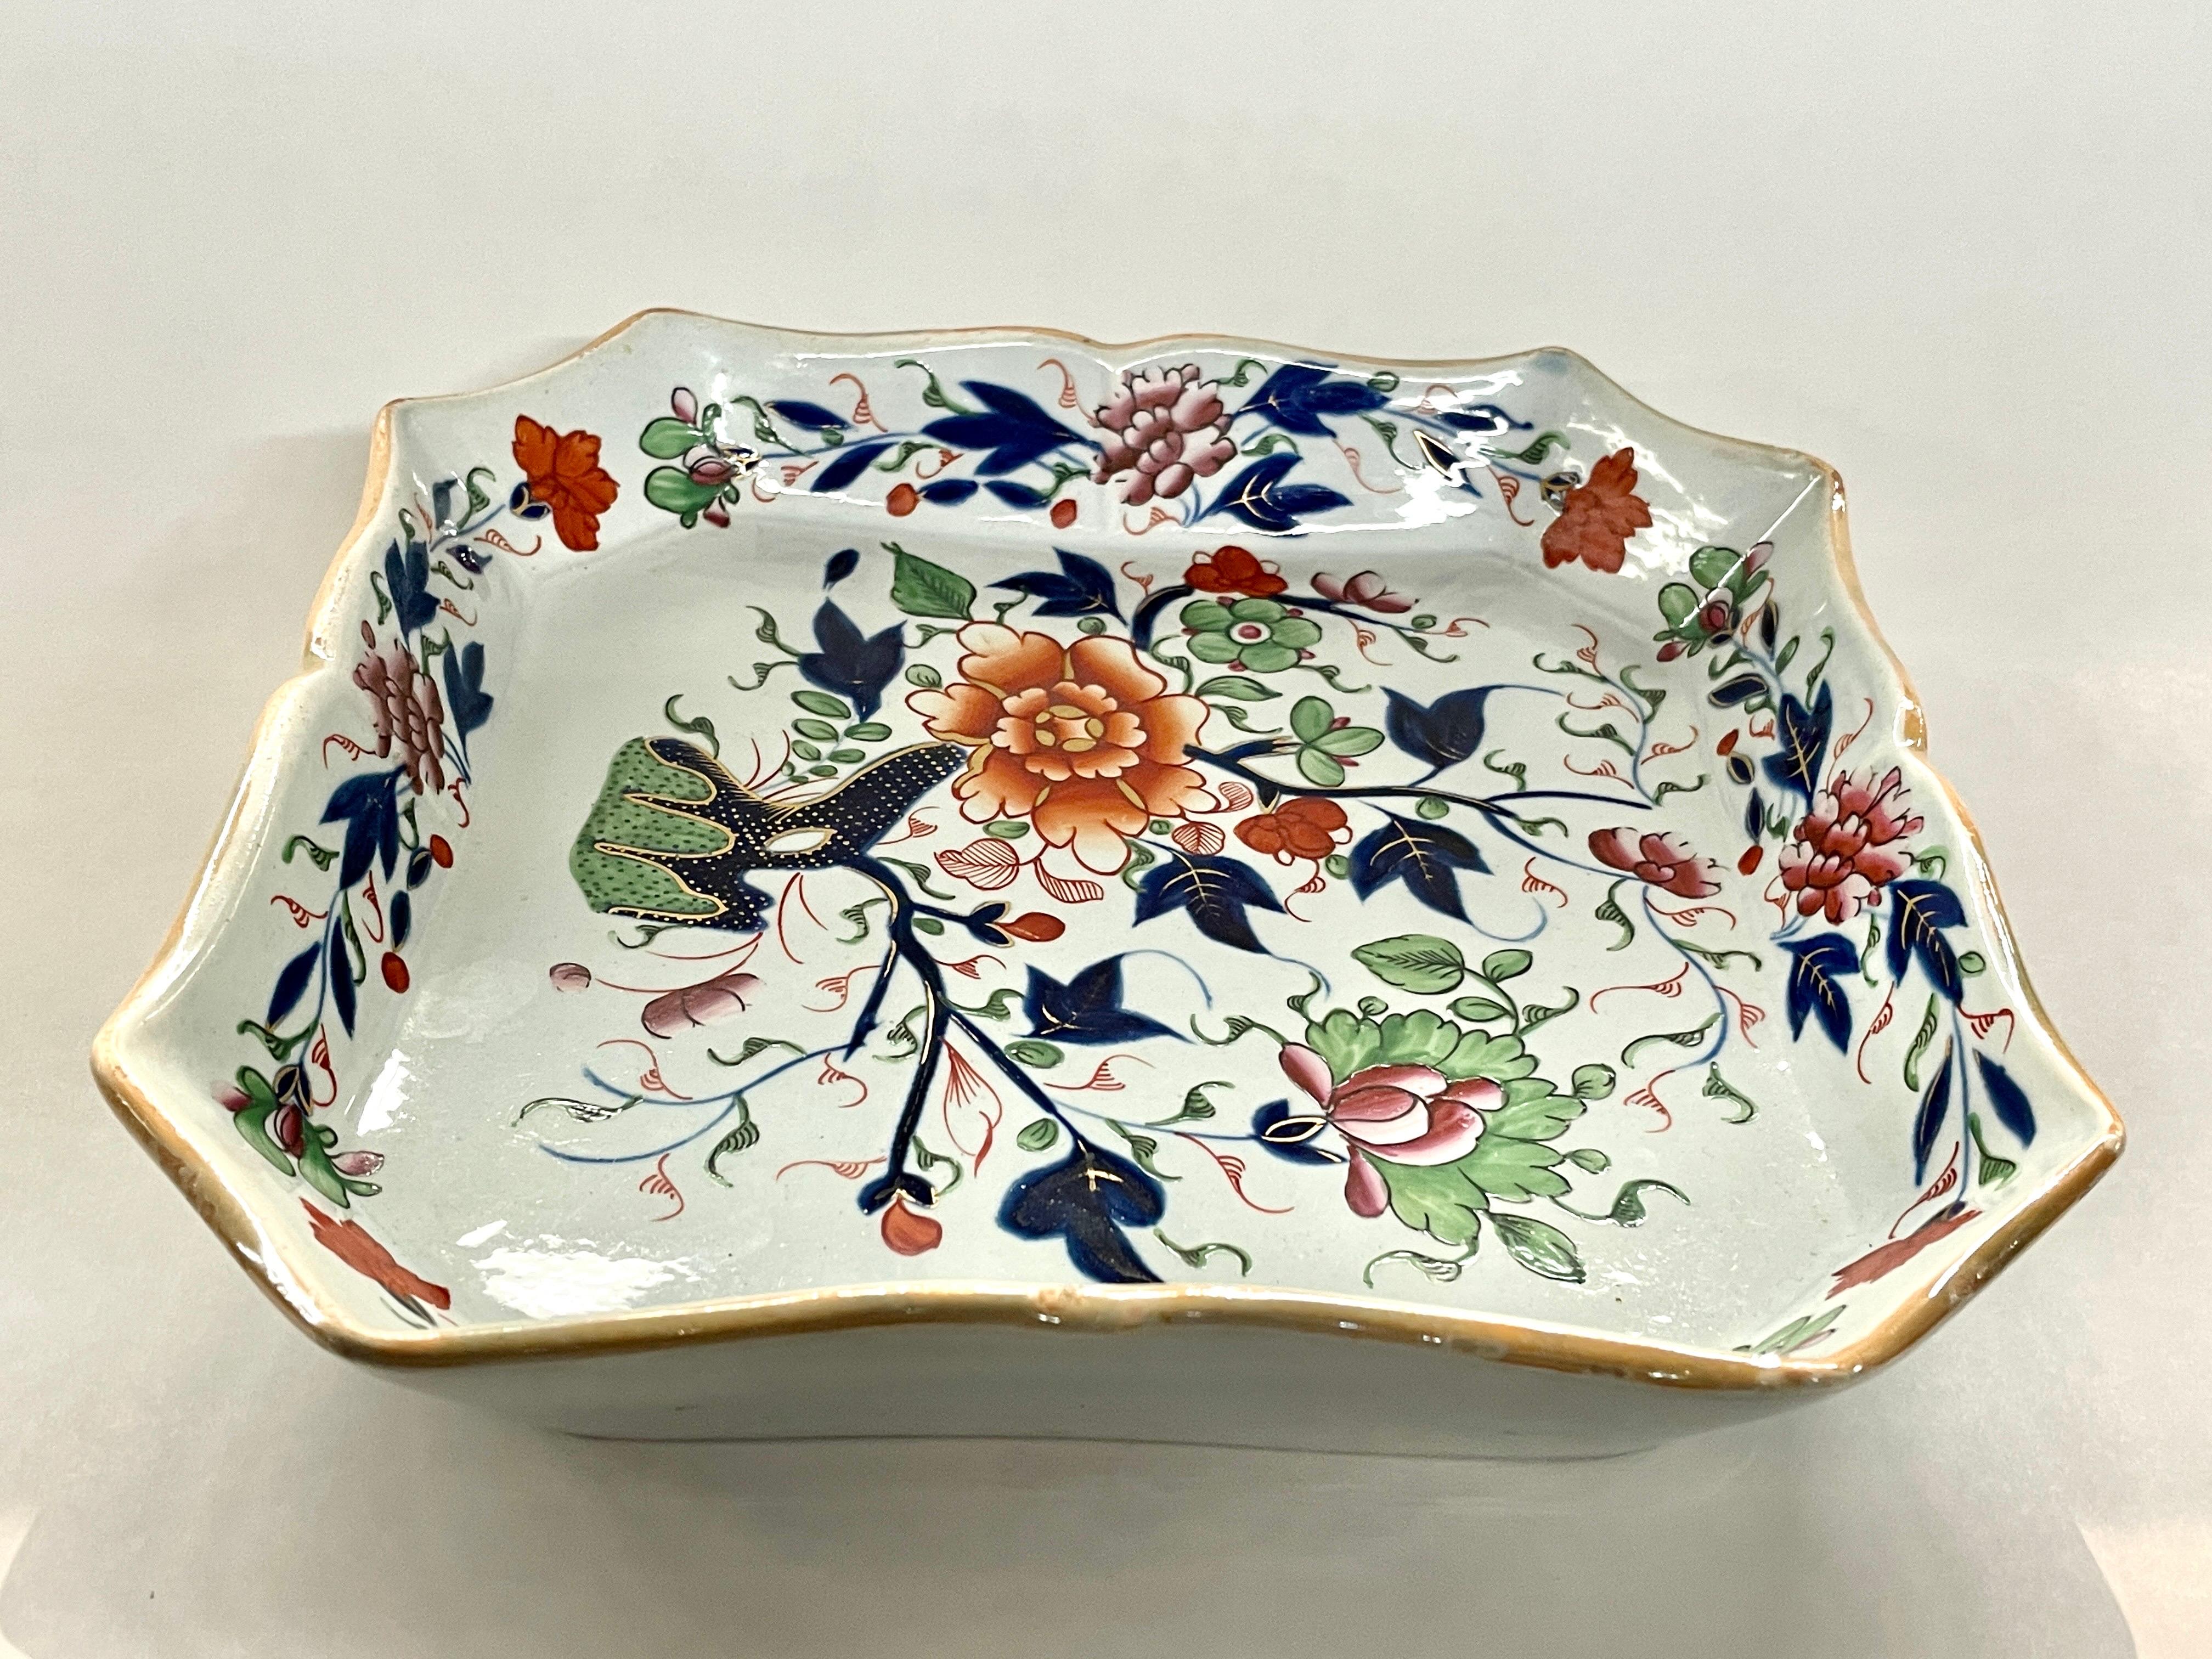 This is a particularly fine and rare Antique English early 19th century ironstone square Dessert or Serving Dish with brilliant imari hand-painted decor. The printed mark on reverse says 